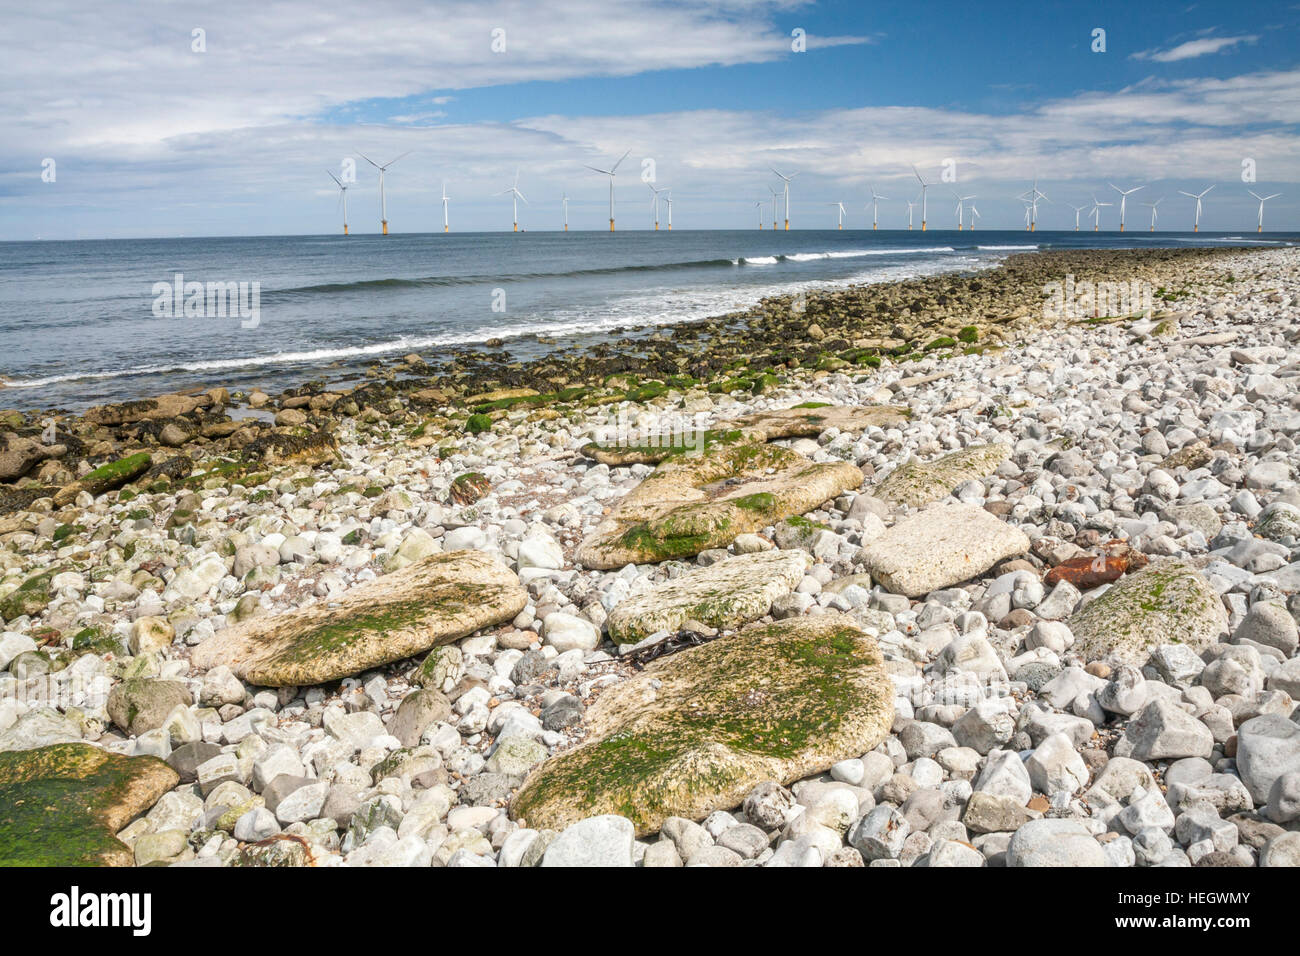 A view of the wind turbines off the coast of Redcar,England,UK Stock Photo